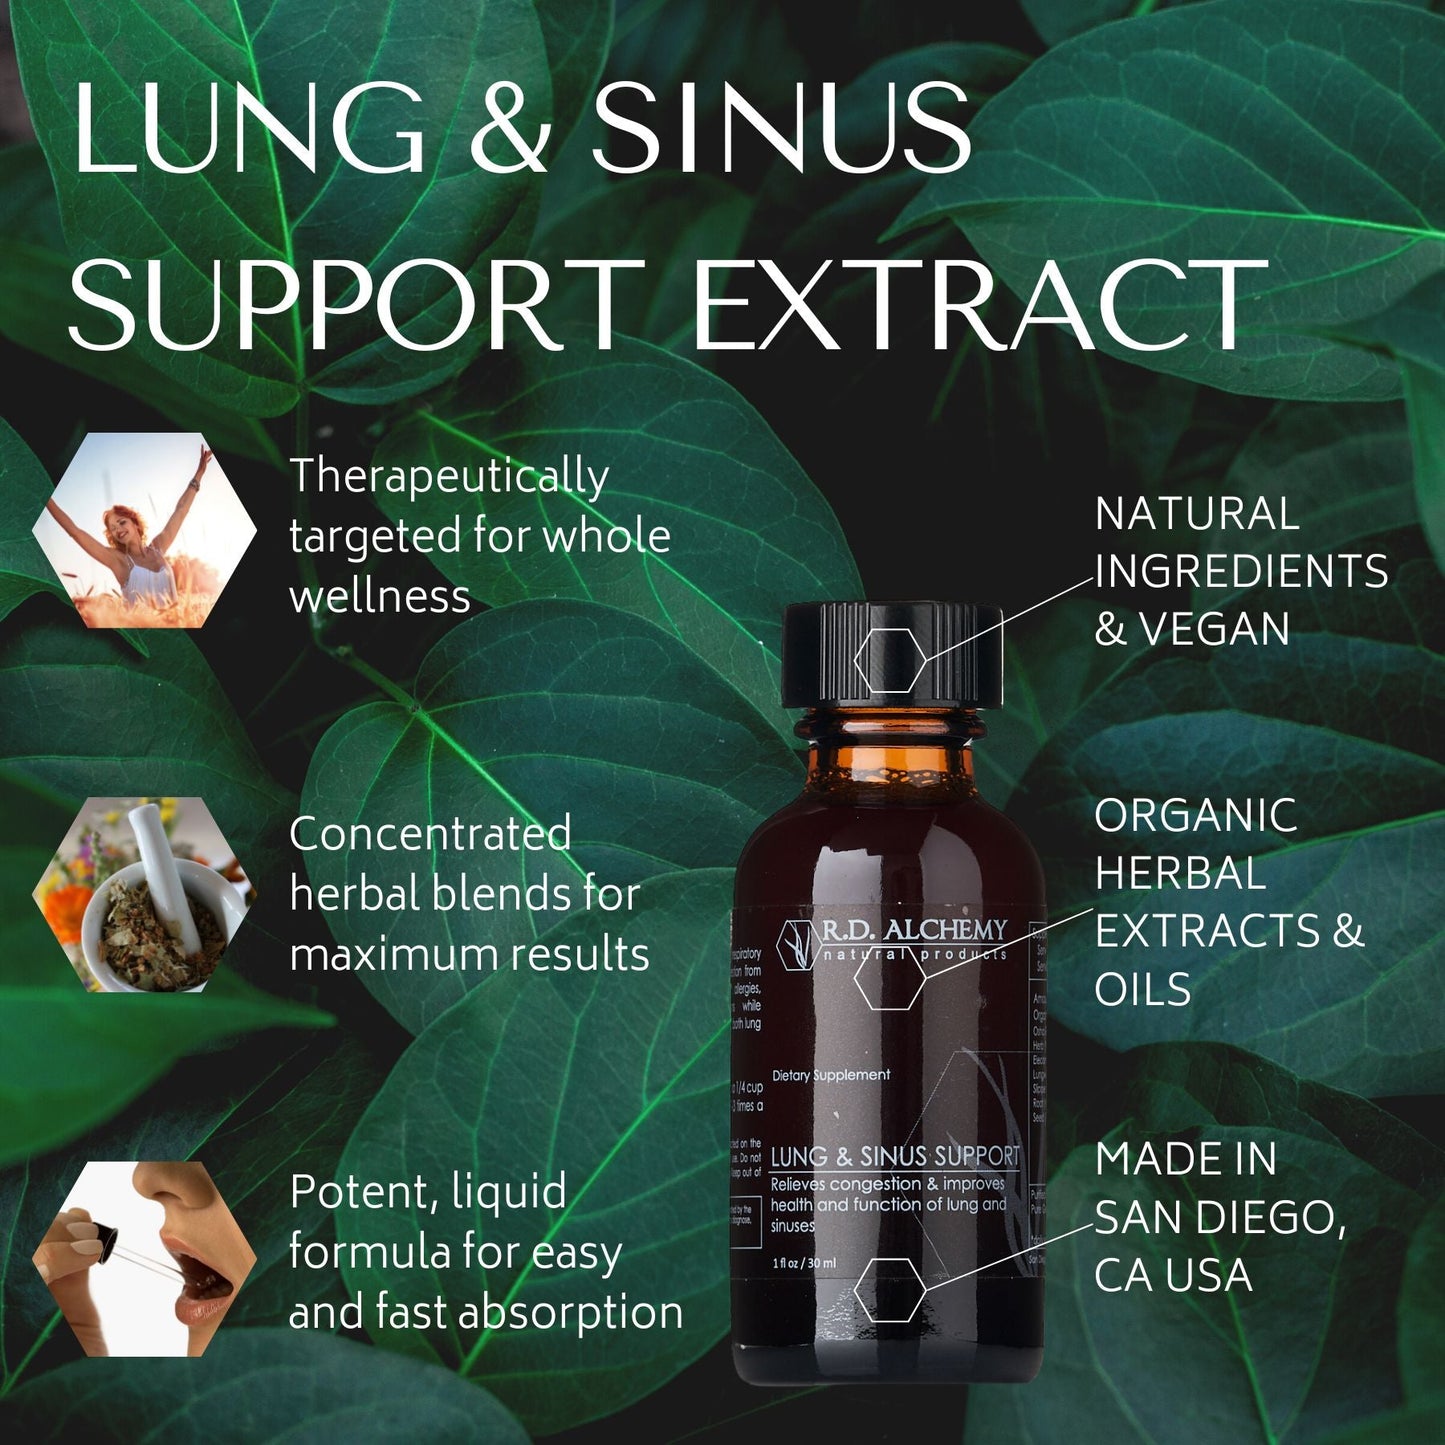 Lung & Sinus Support Extract